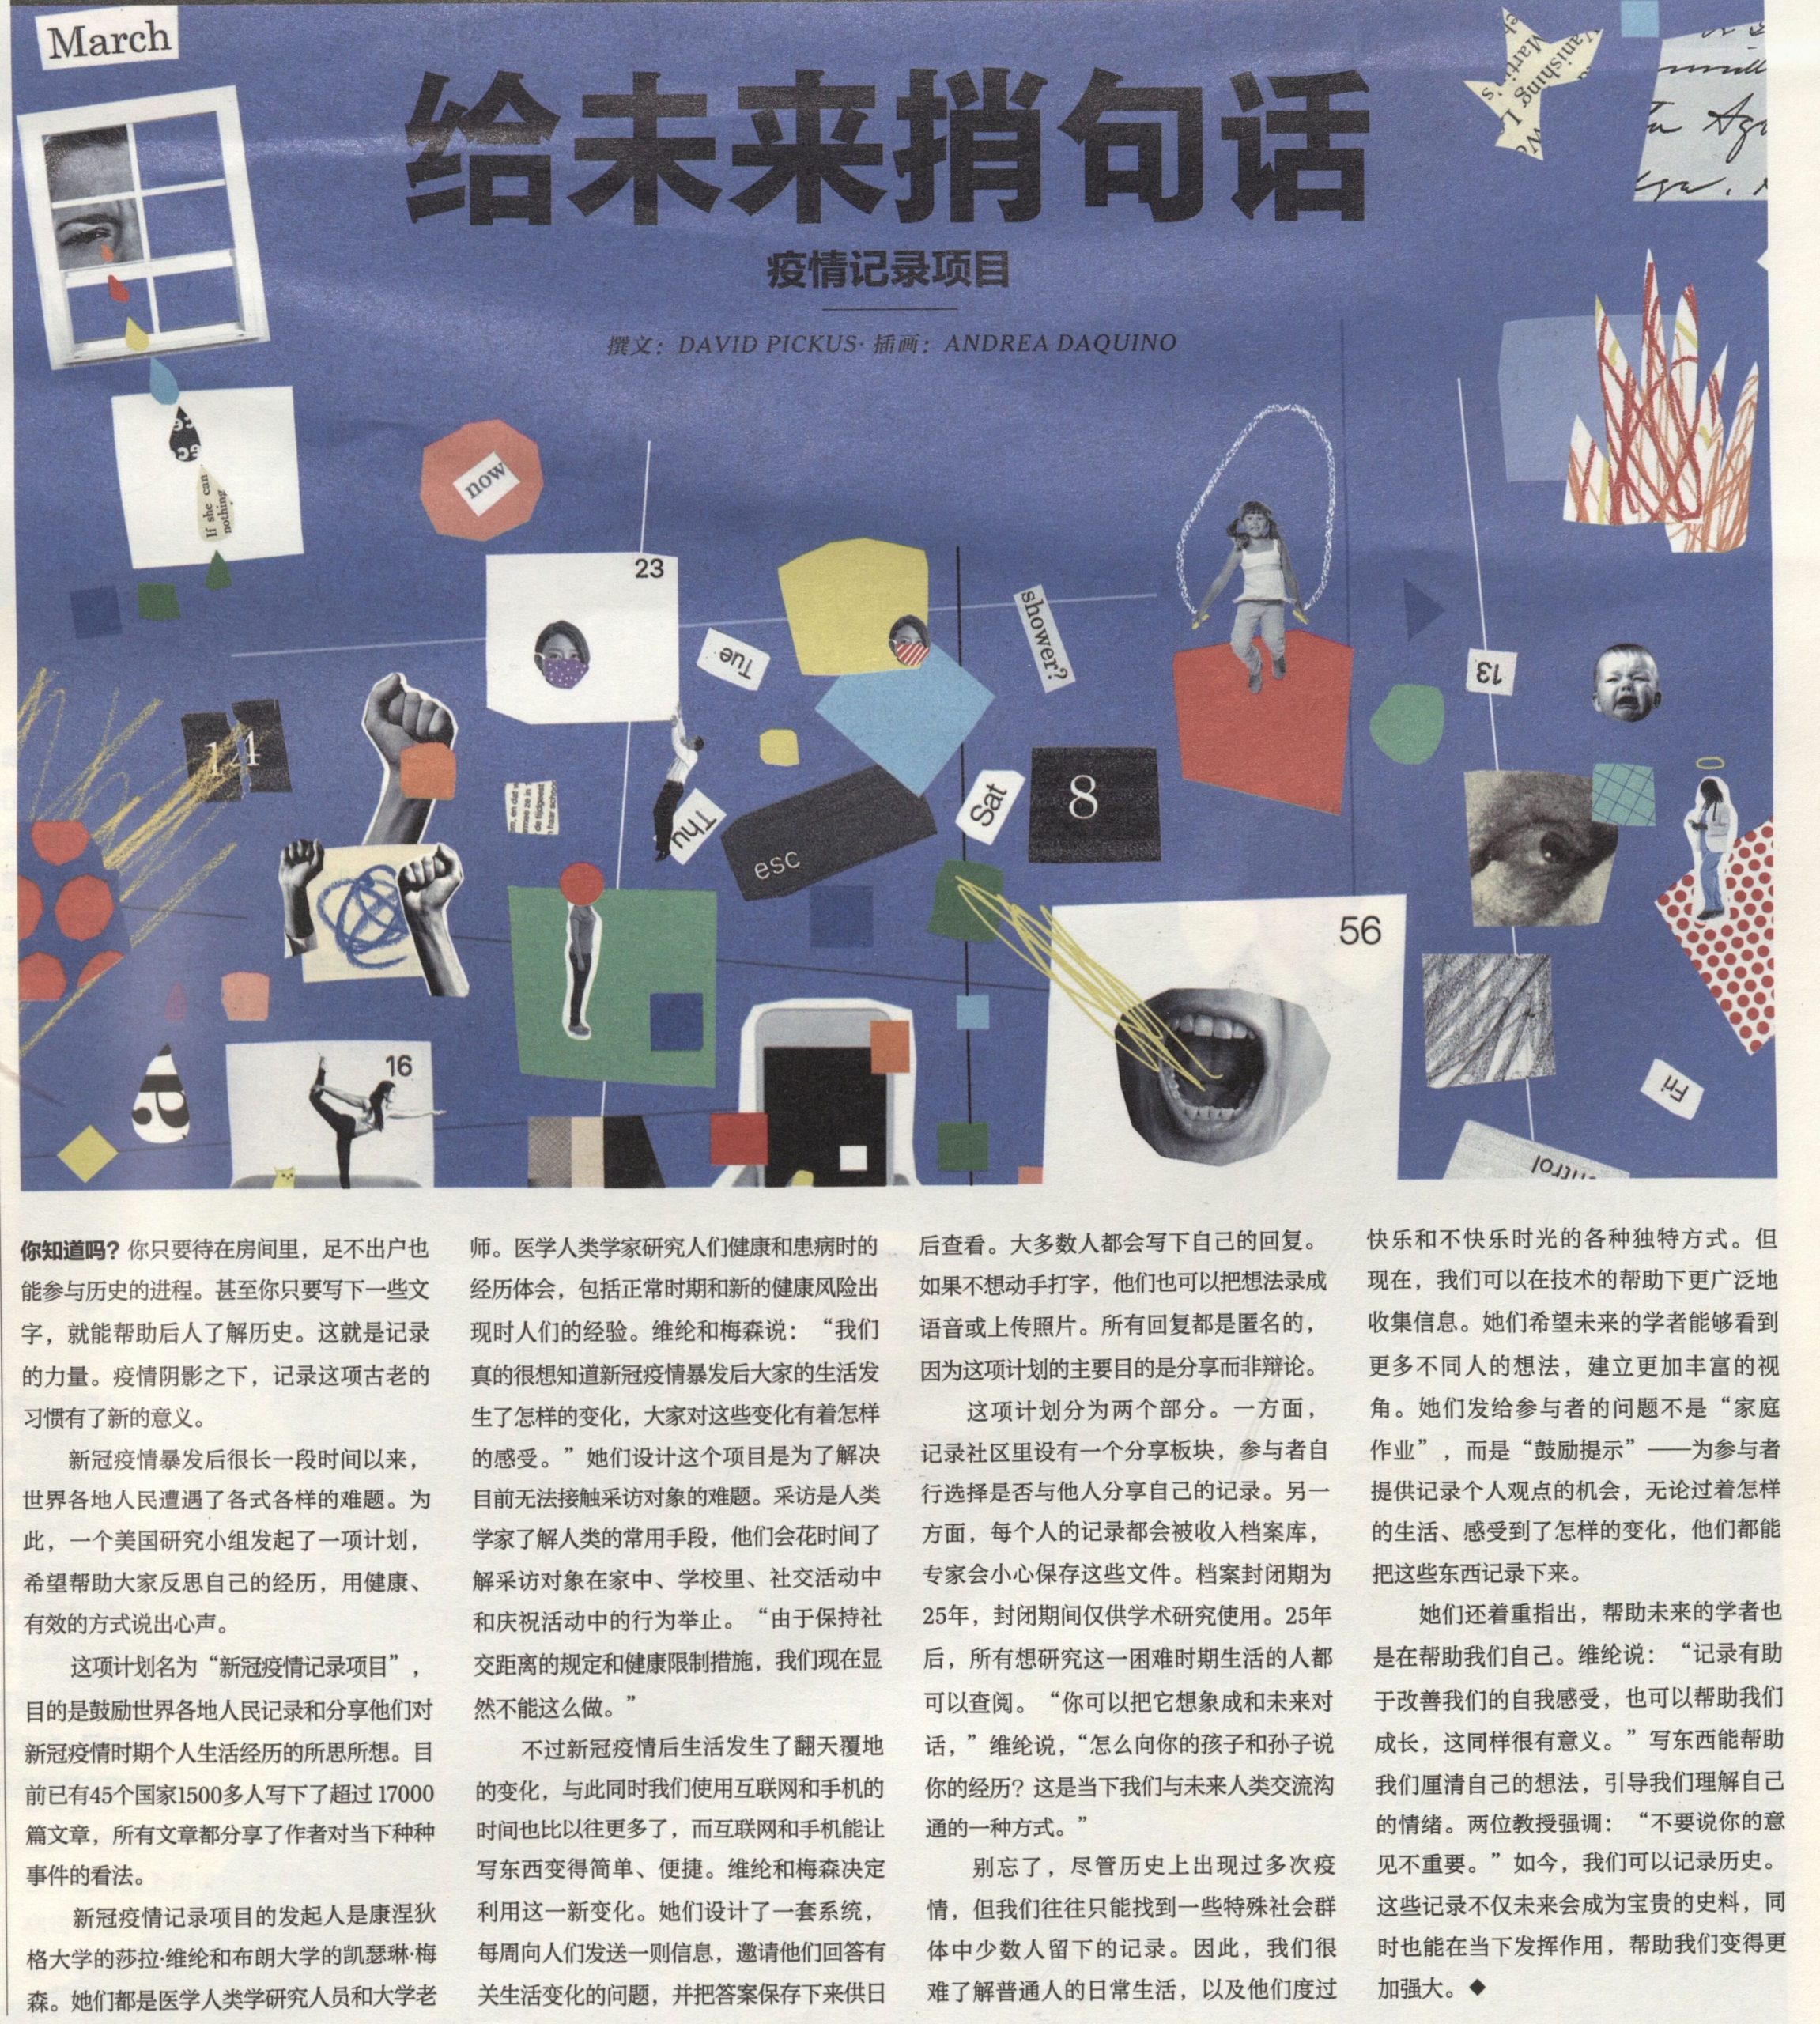 Article about PJP in NY Times Kids China edition, in Chinese.